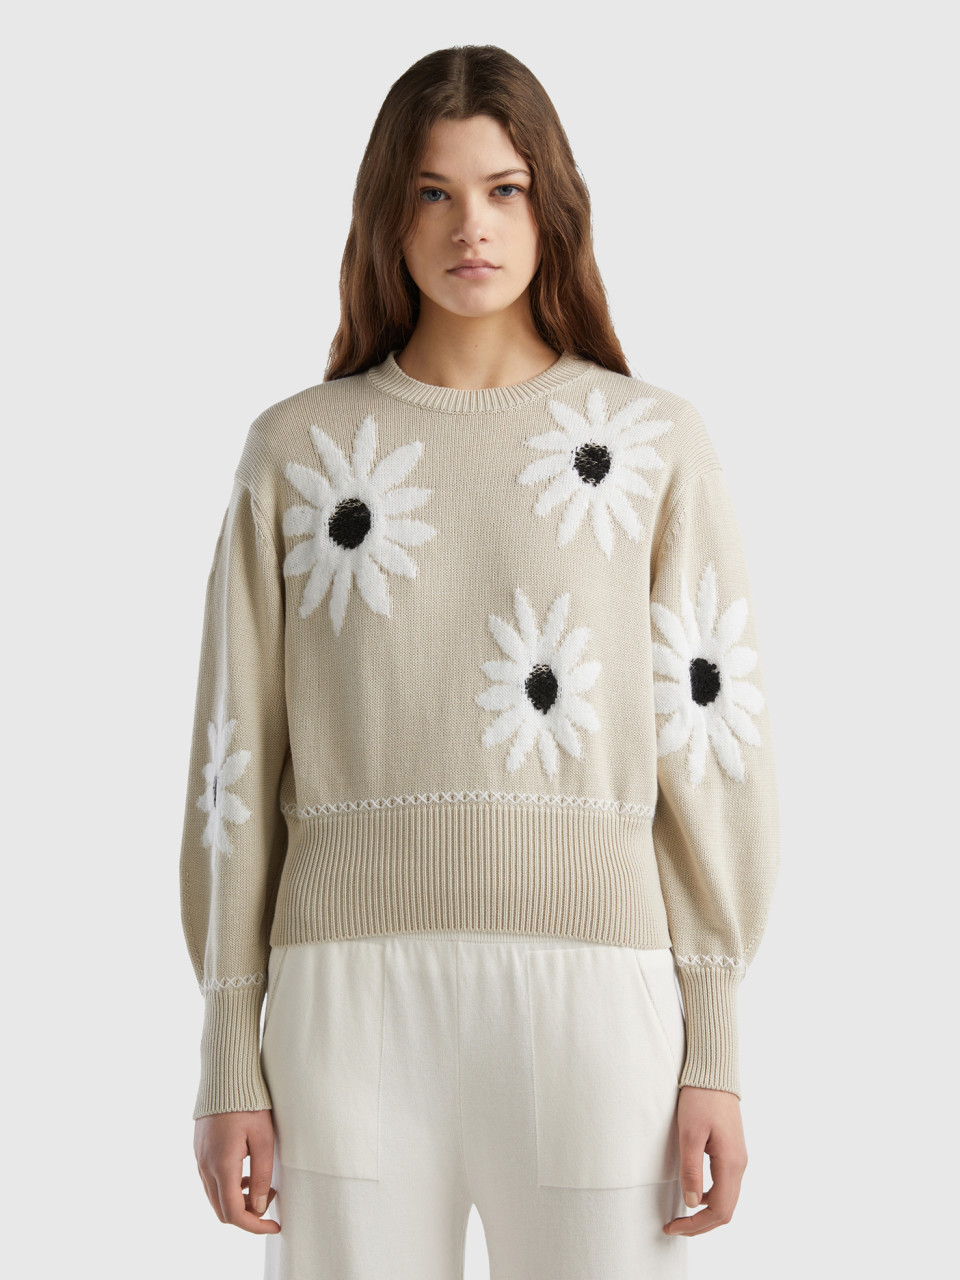 Benetton, Sweater With Floral Inlay, Beige, Women